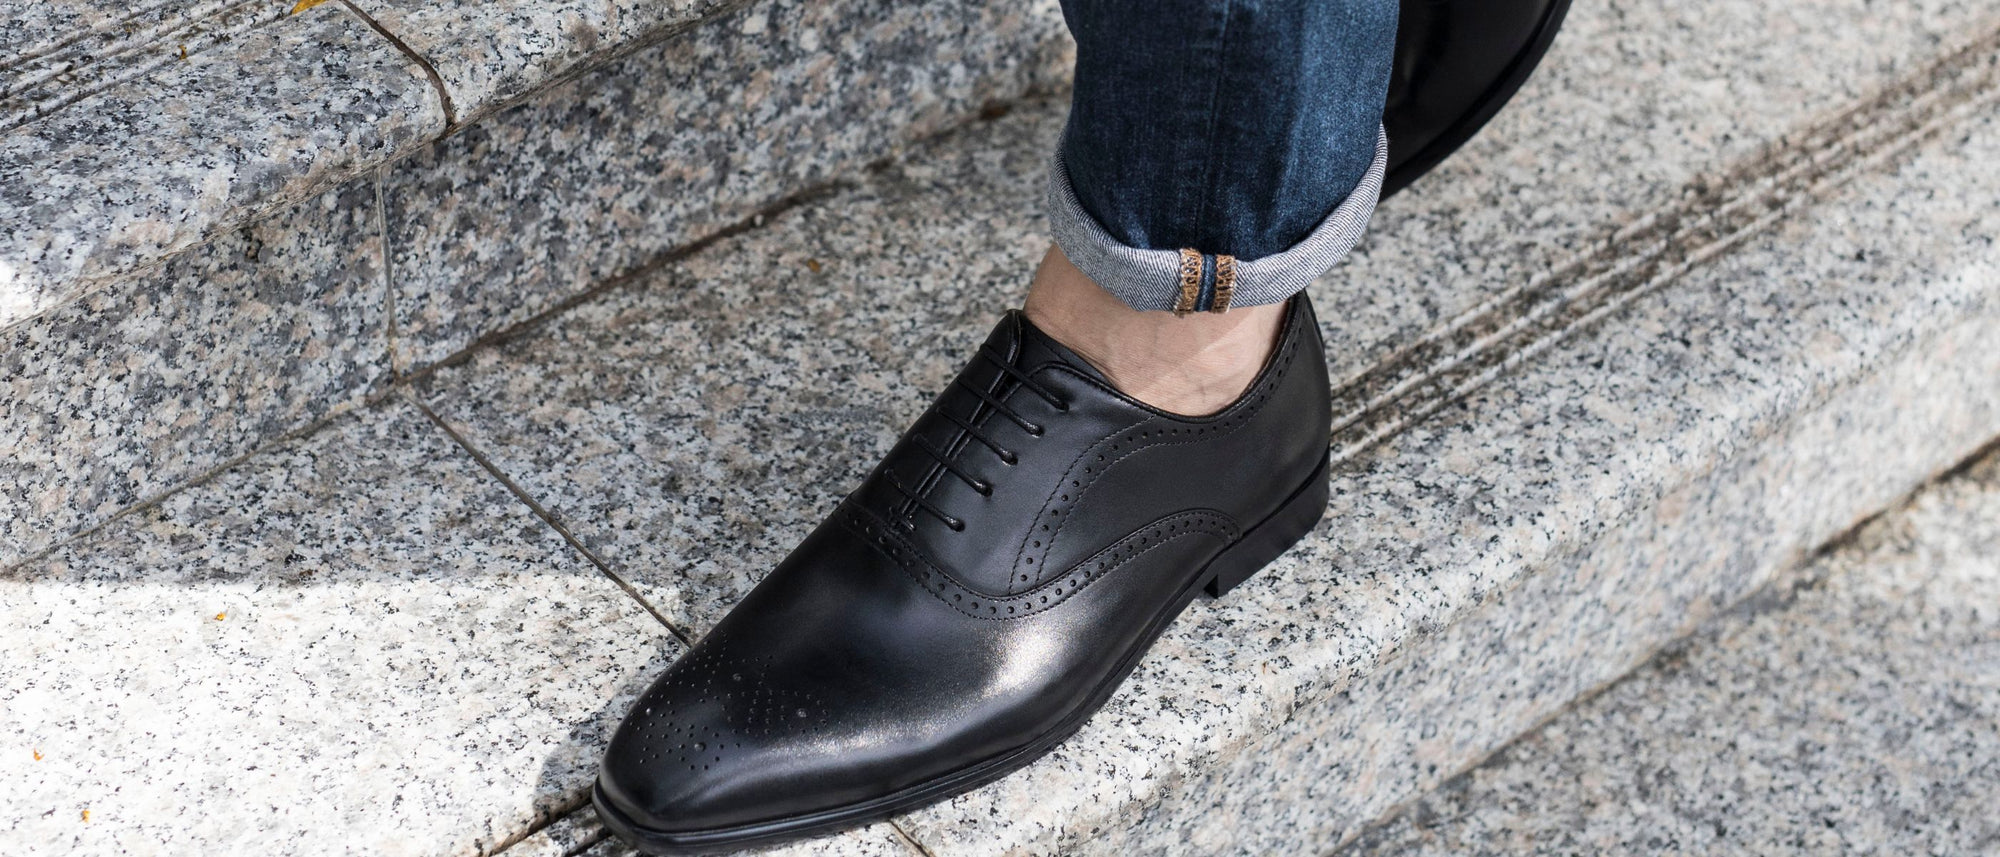 How to Wear Brogue Shoes